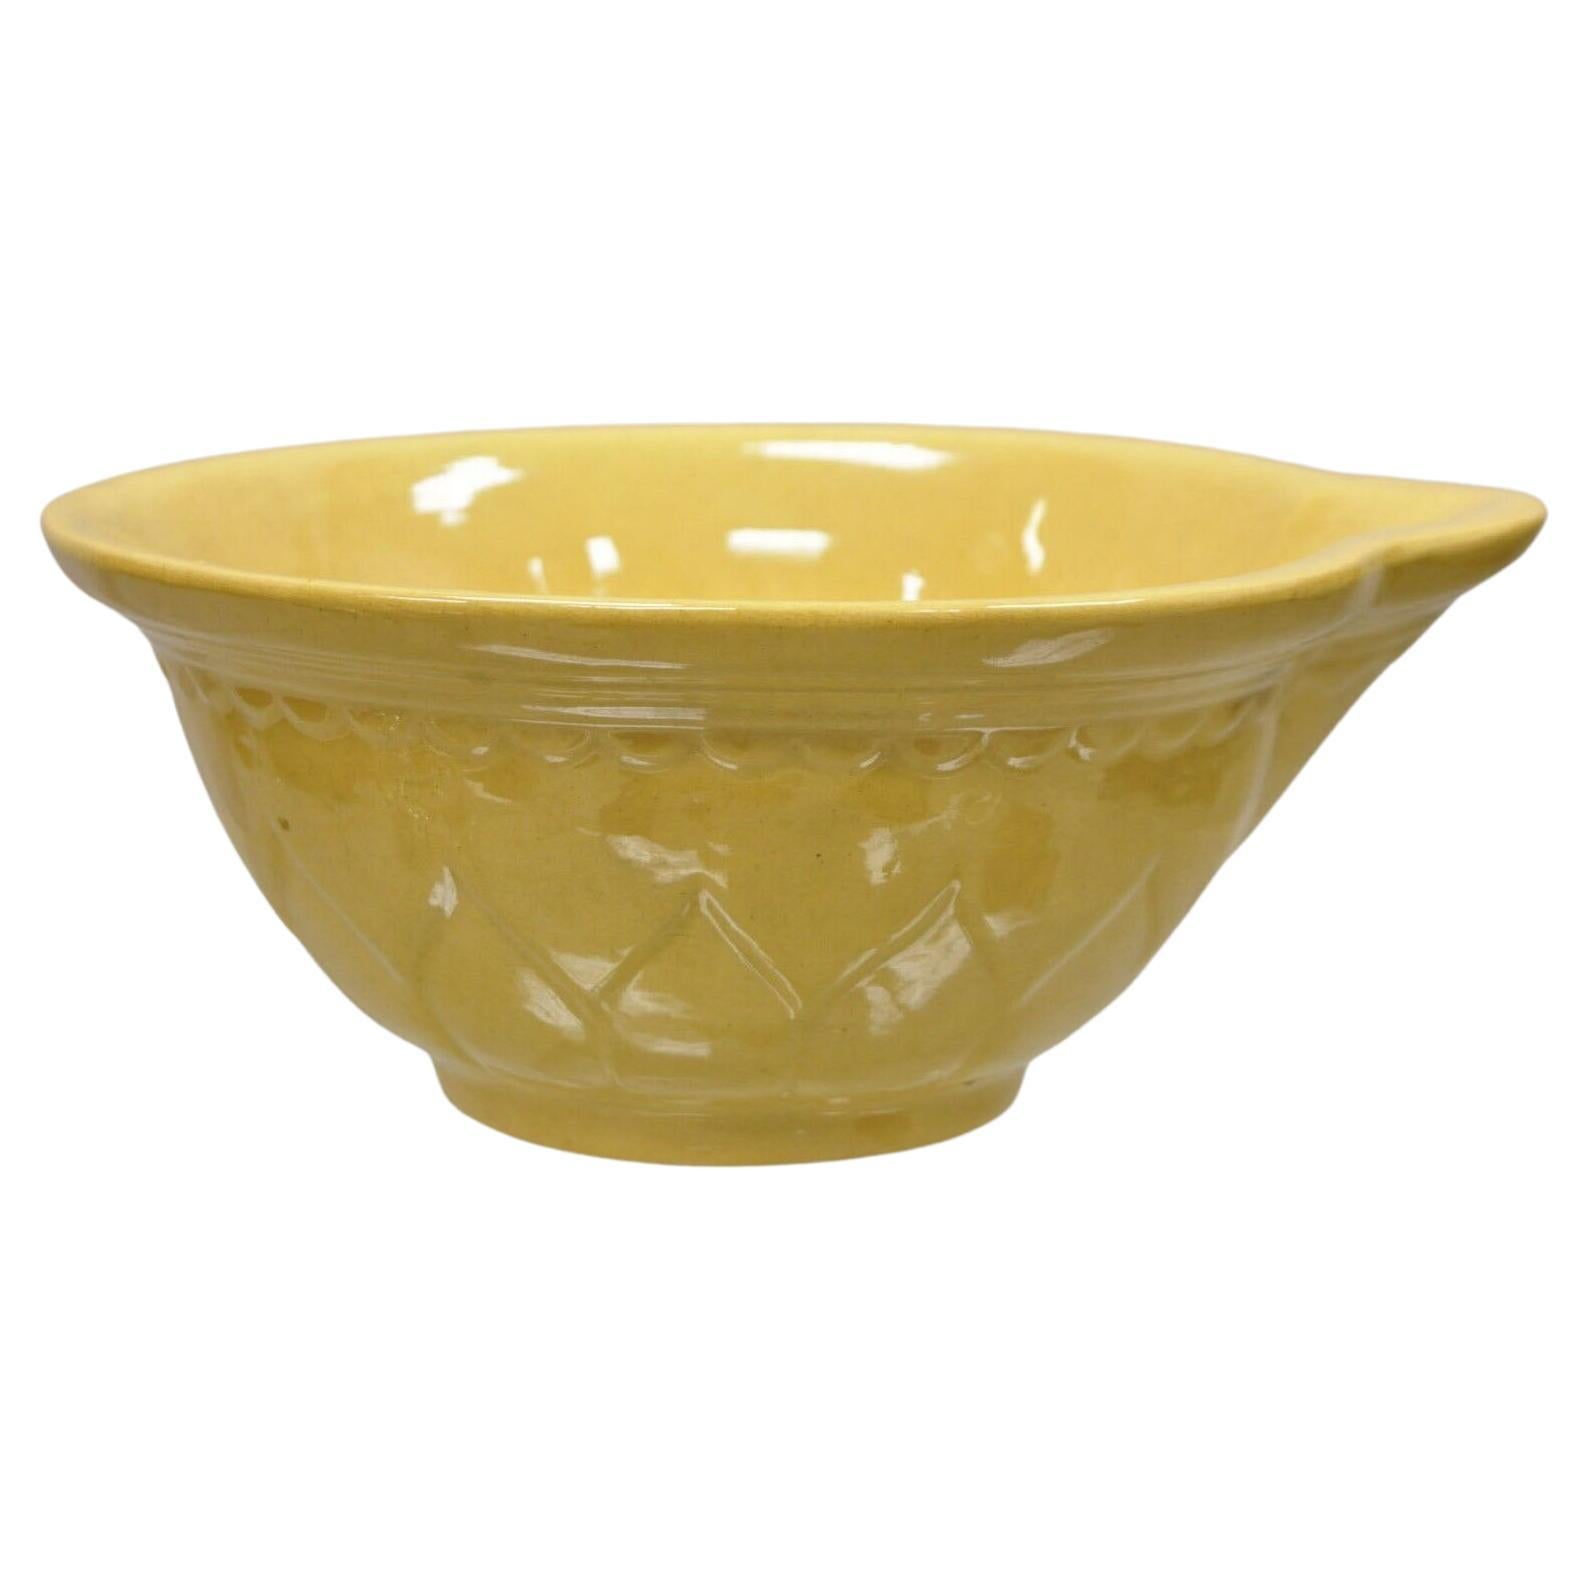 American Provincial Country Primitive Yellow Pottery Ceramic Wash Basin Bowl For Sale